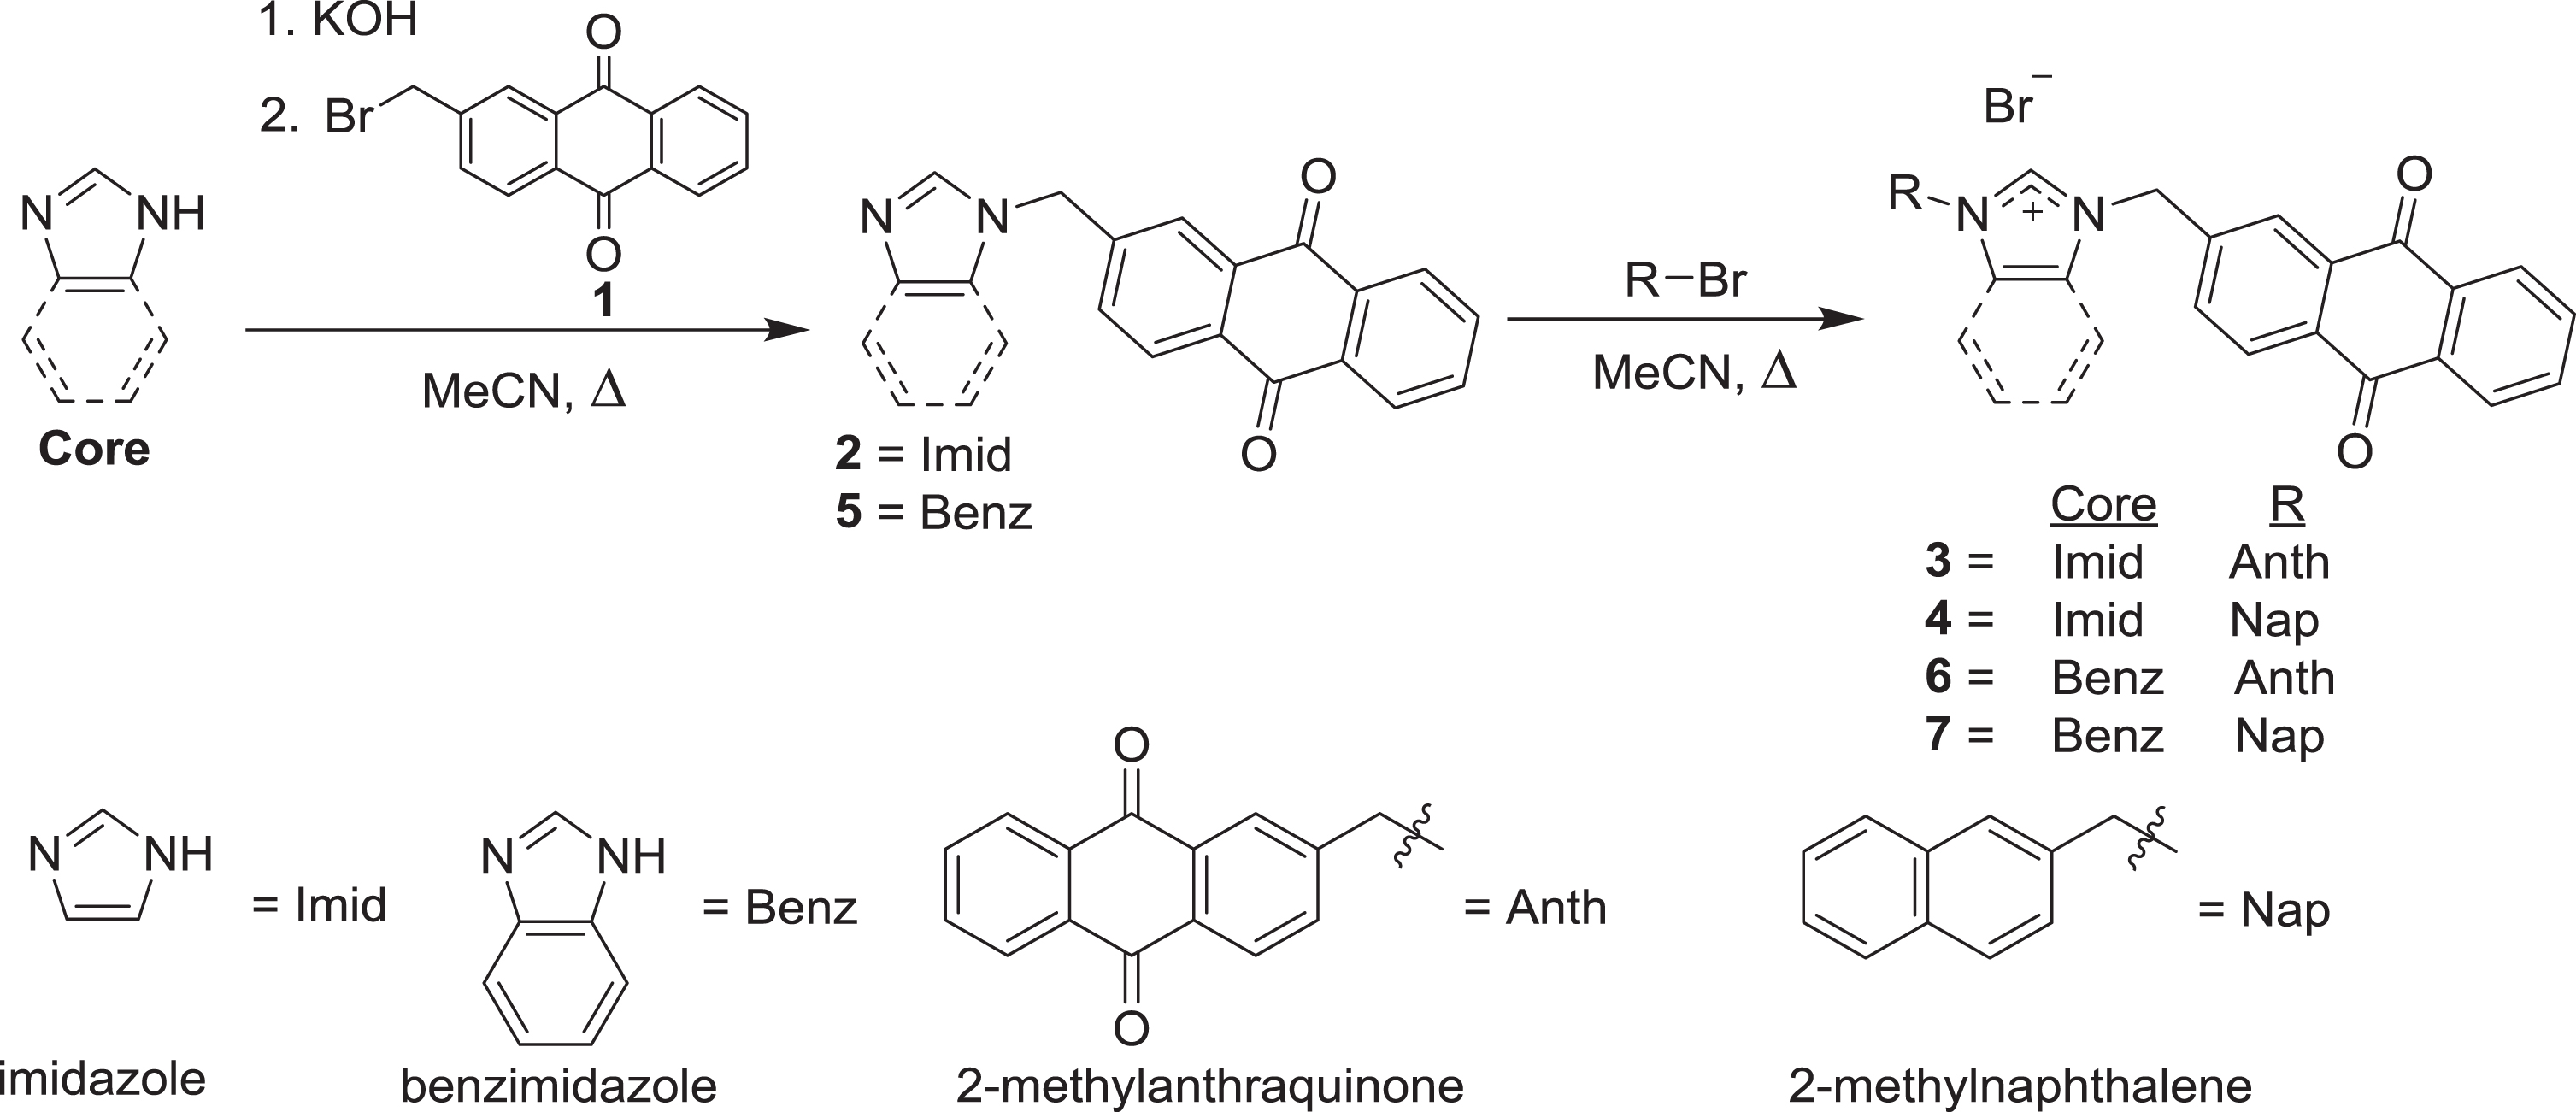 Syntheses of compounds 2–7 by alkylation of imidazole or benzimidazole with 1 or 2-bromomethylnaphthalene.